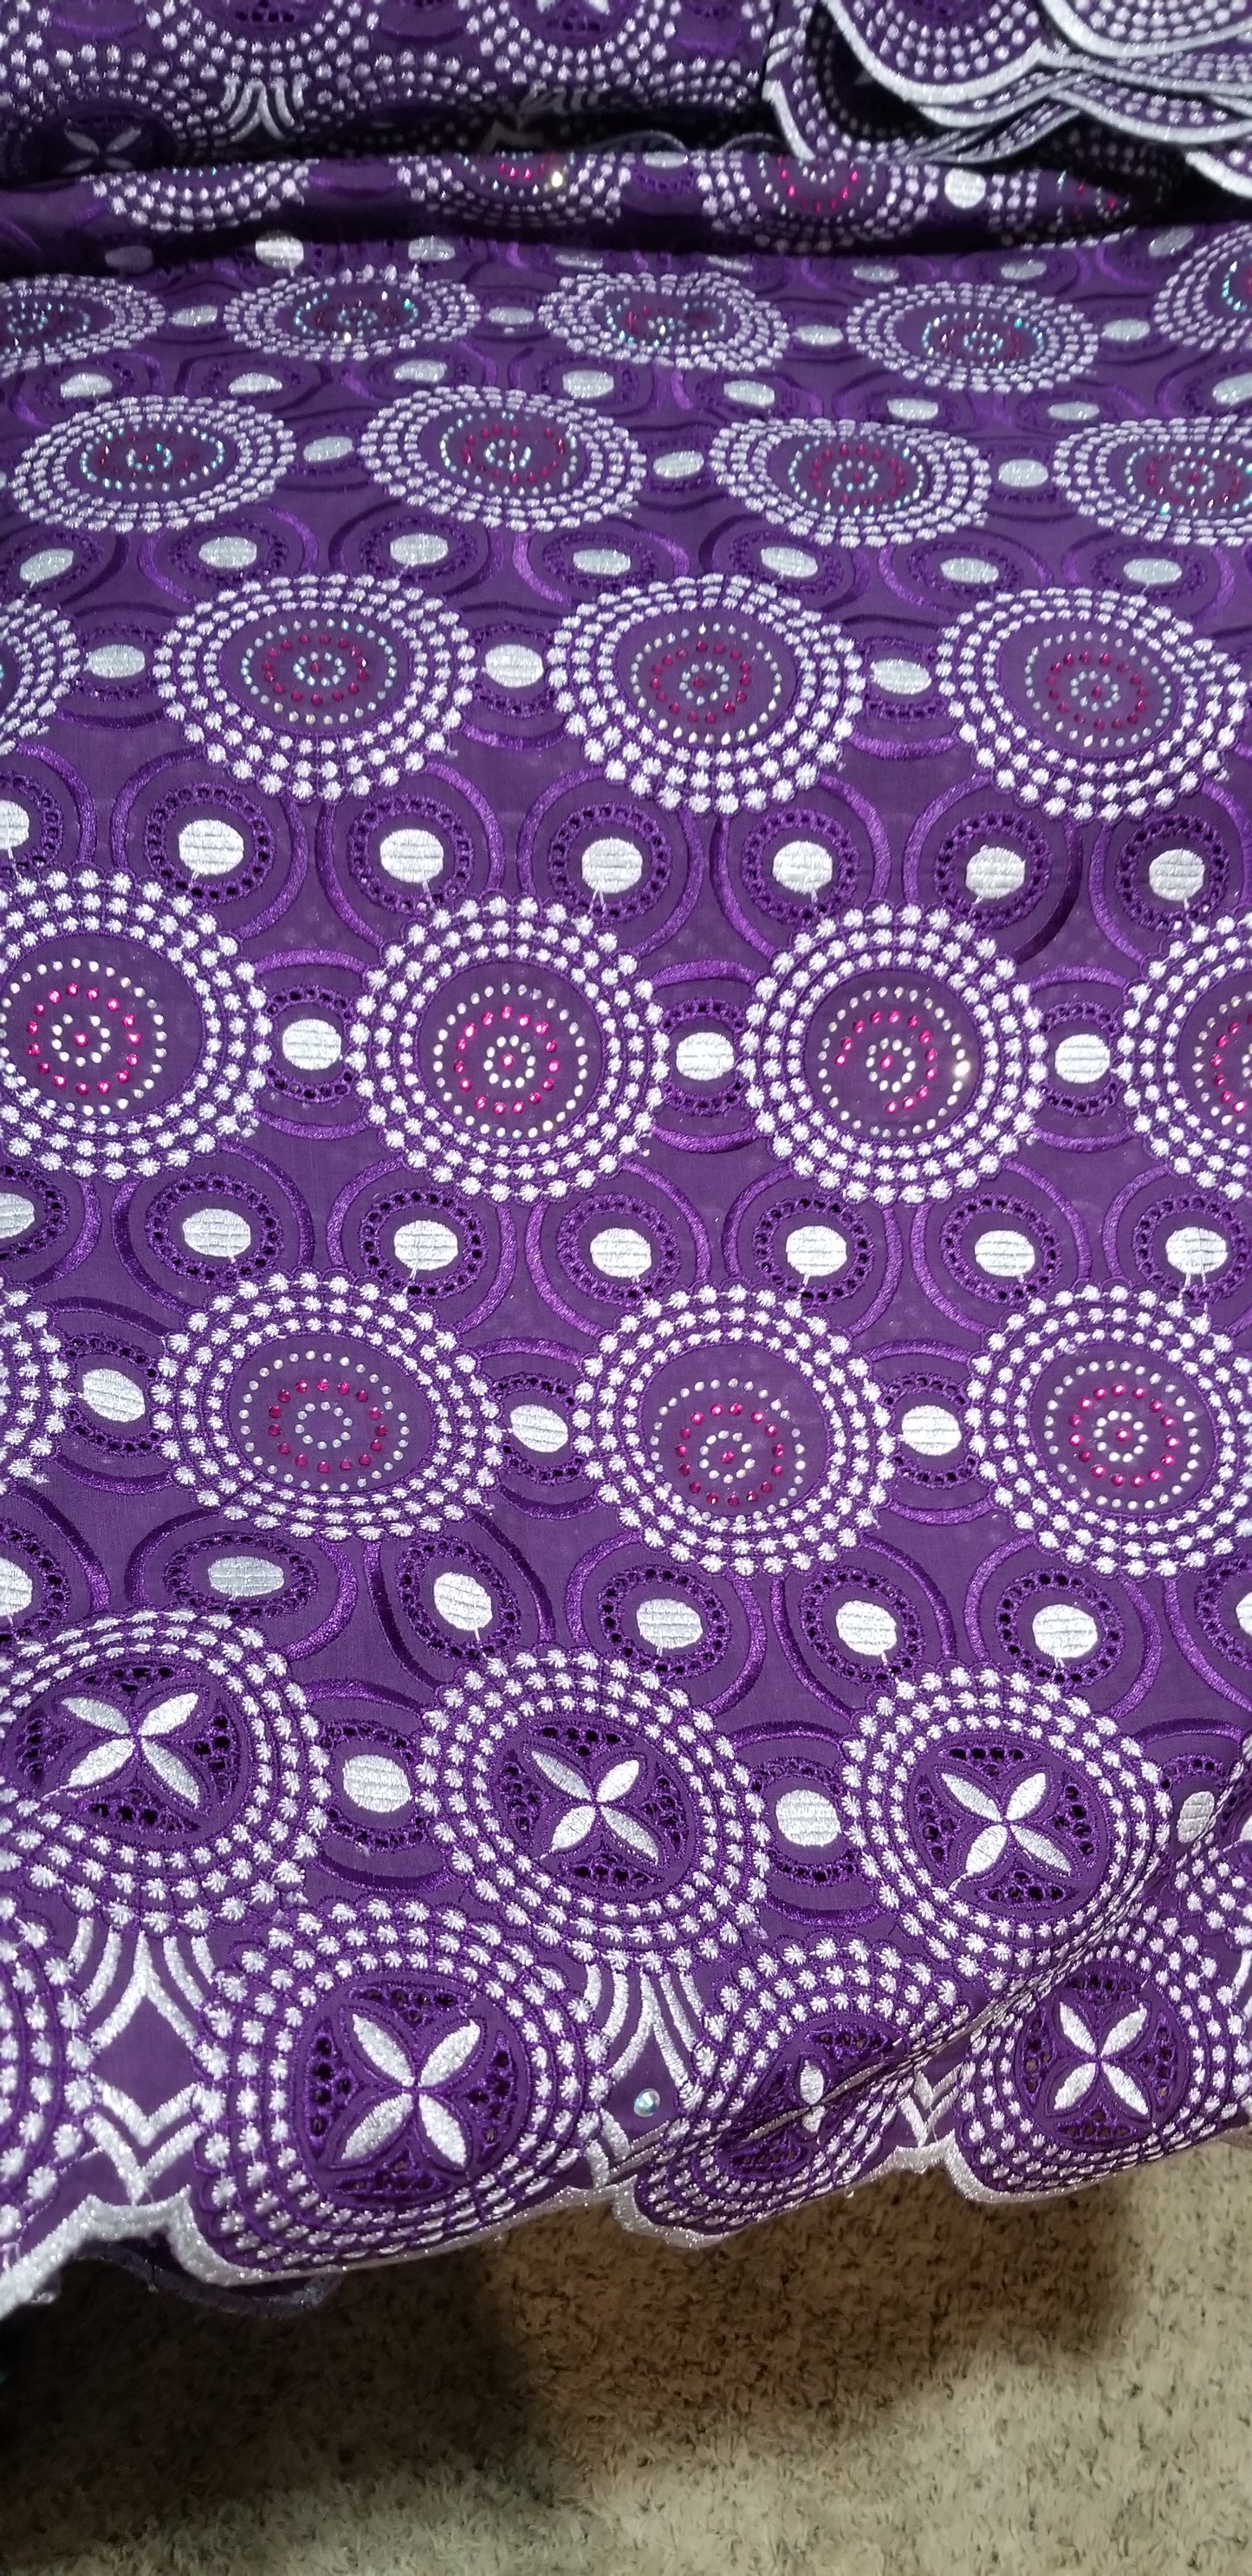 Sale: Quality Embroidery African/Nigerian party fabric for making party outfit. Sweet purple color. VIP purple Swiss lace fabric. Sold per 5yds and price is for 5yds